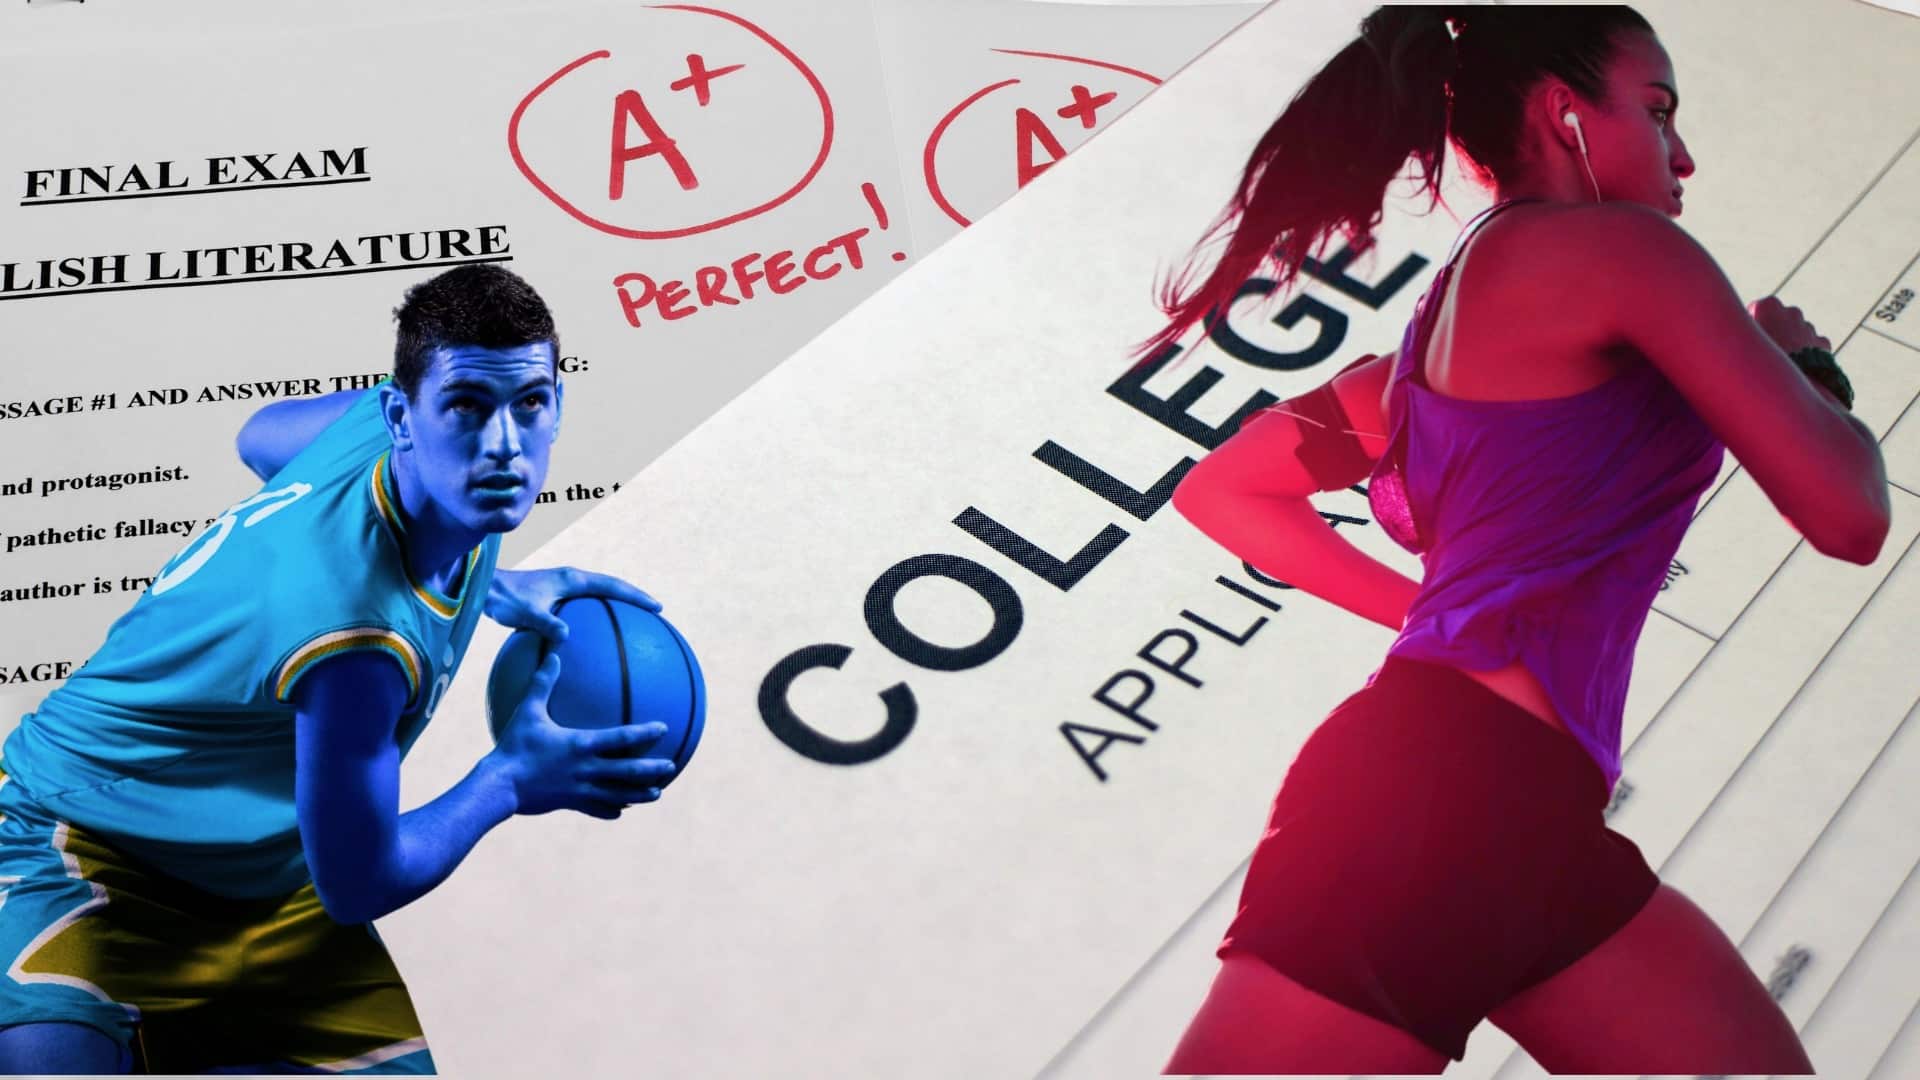 Student athletes face pressure to succeed